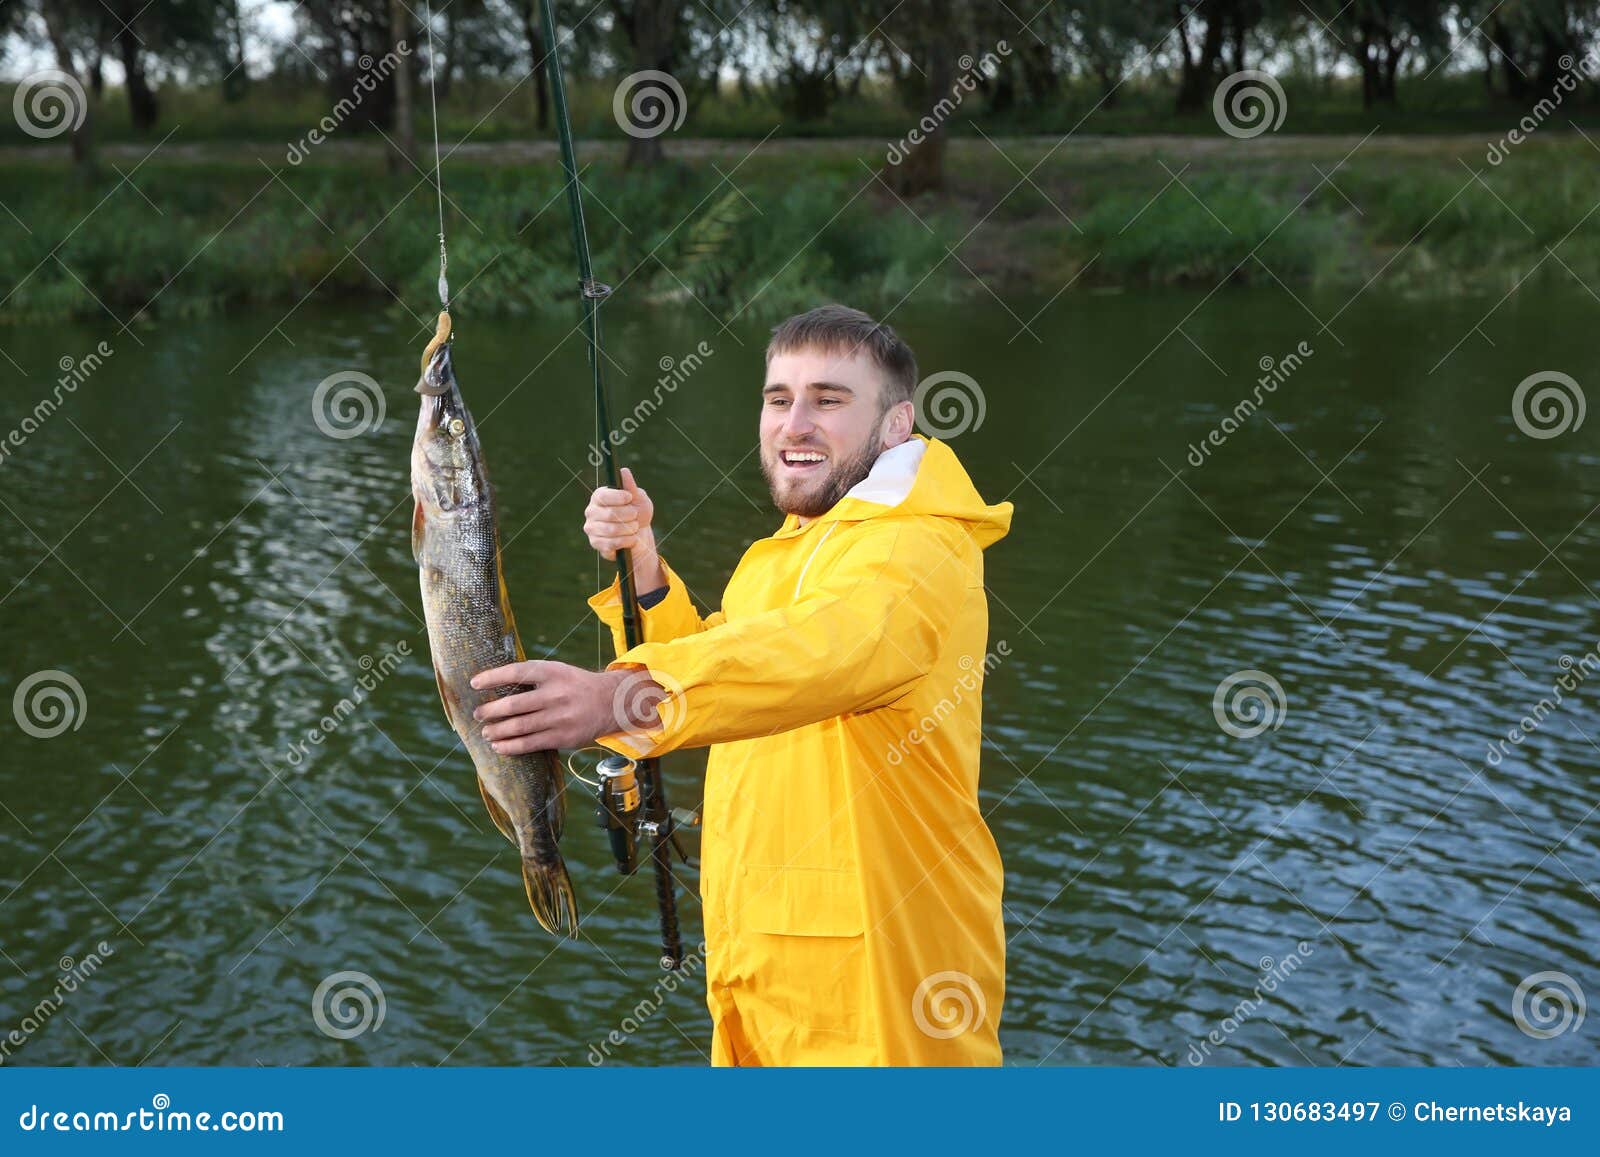 Man with Rod and Catch Fishing at Riverside Stock Image - Image of pond,  freshwater: 130683497